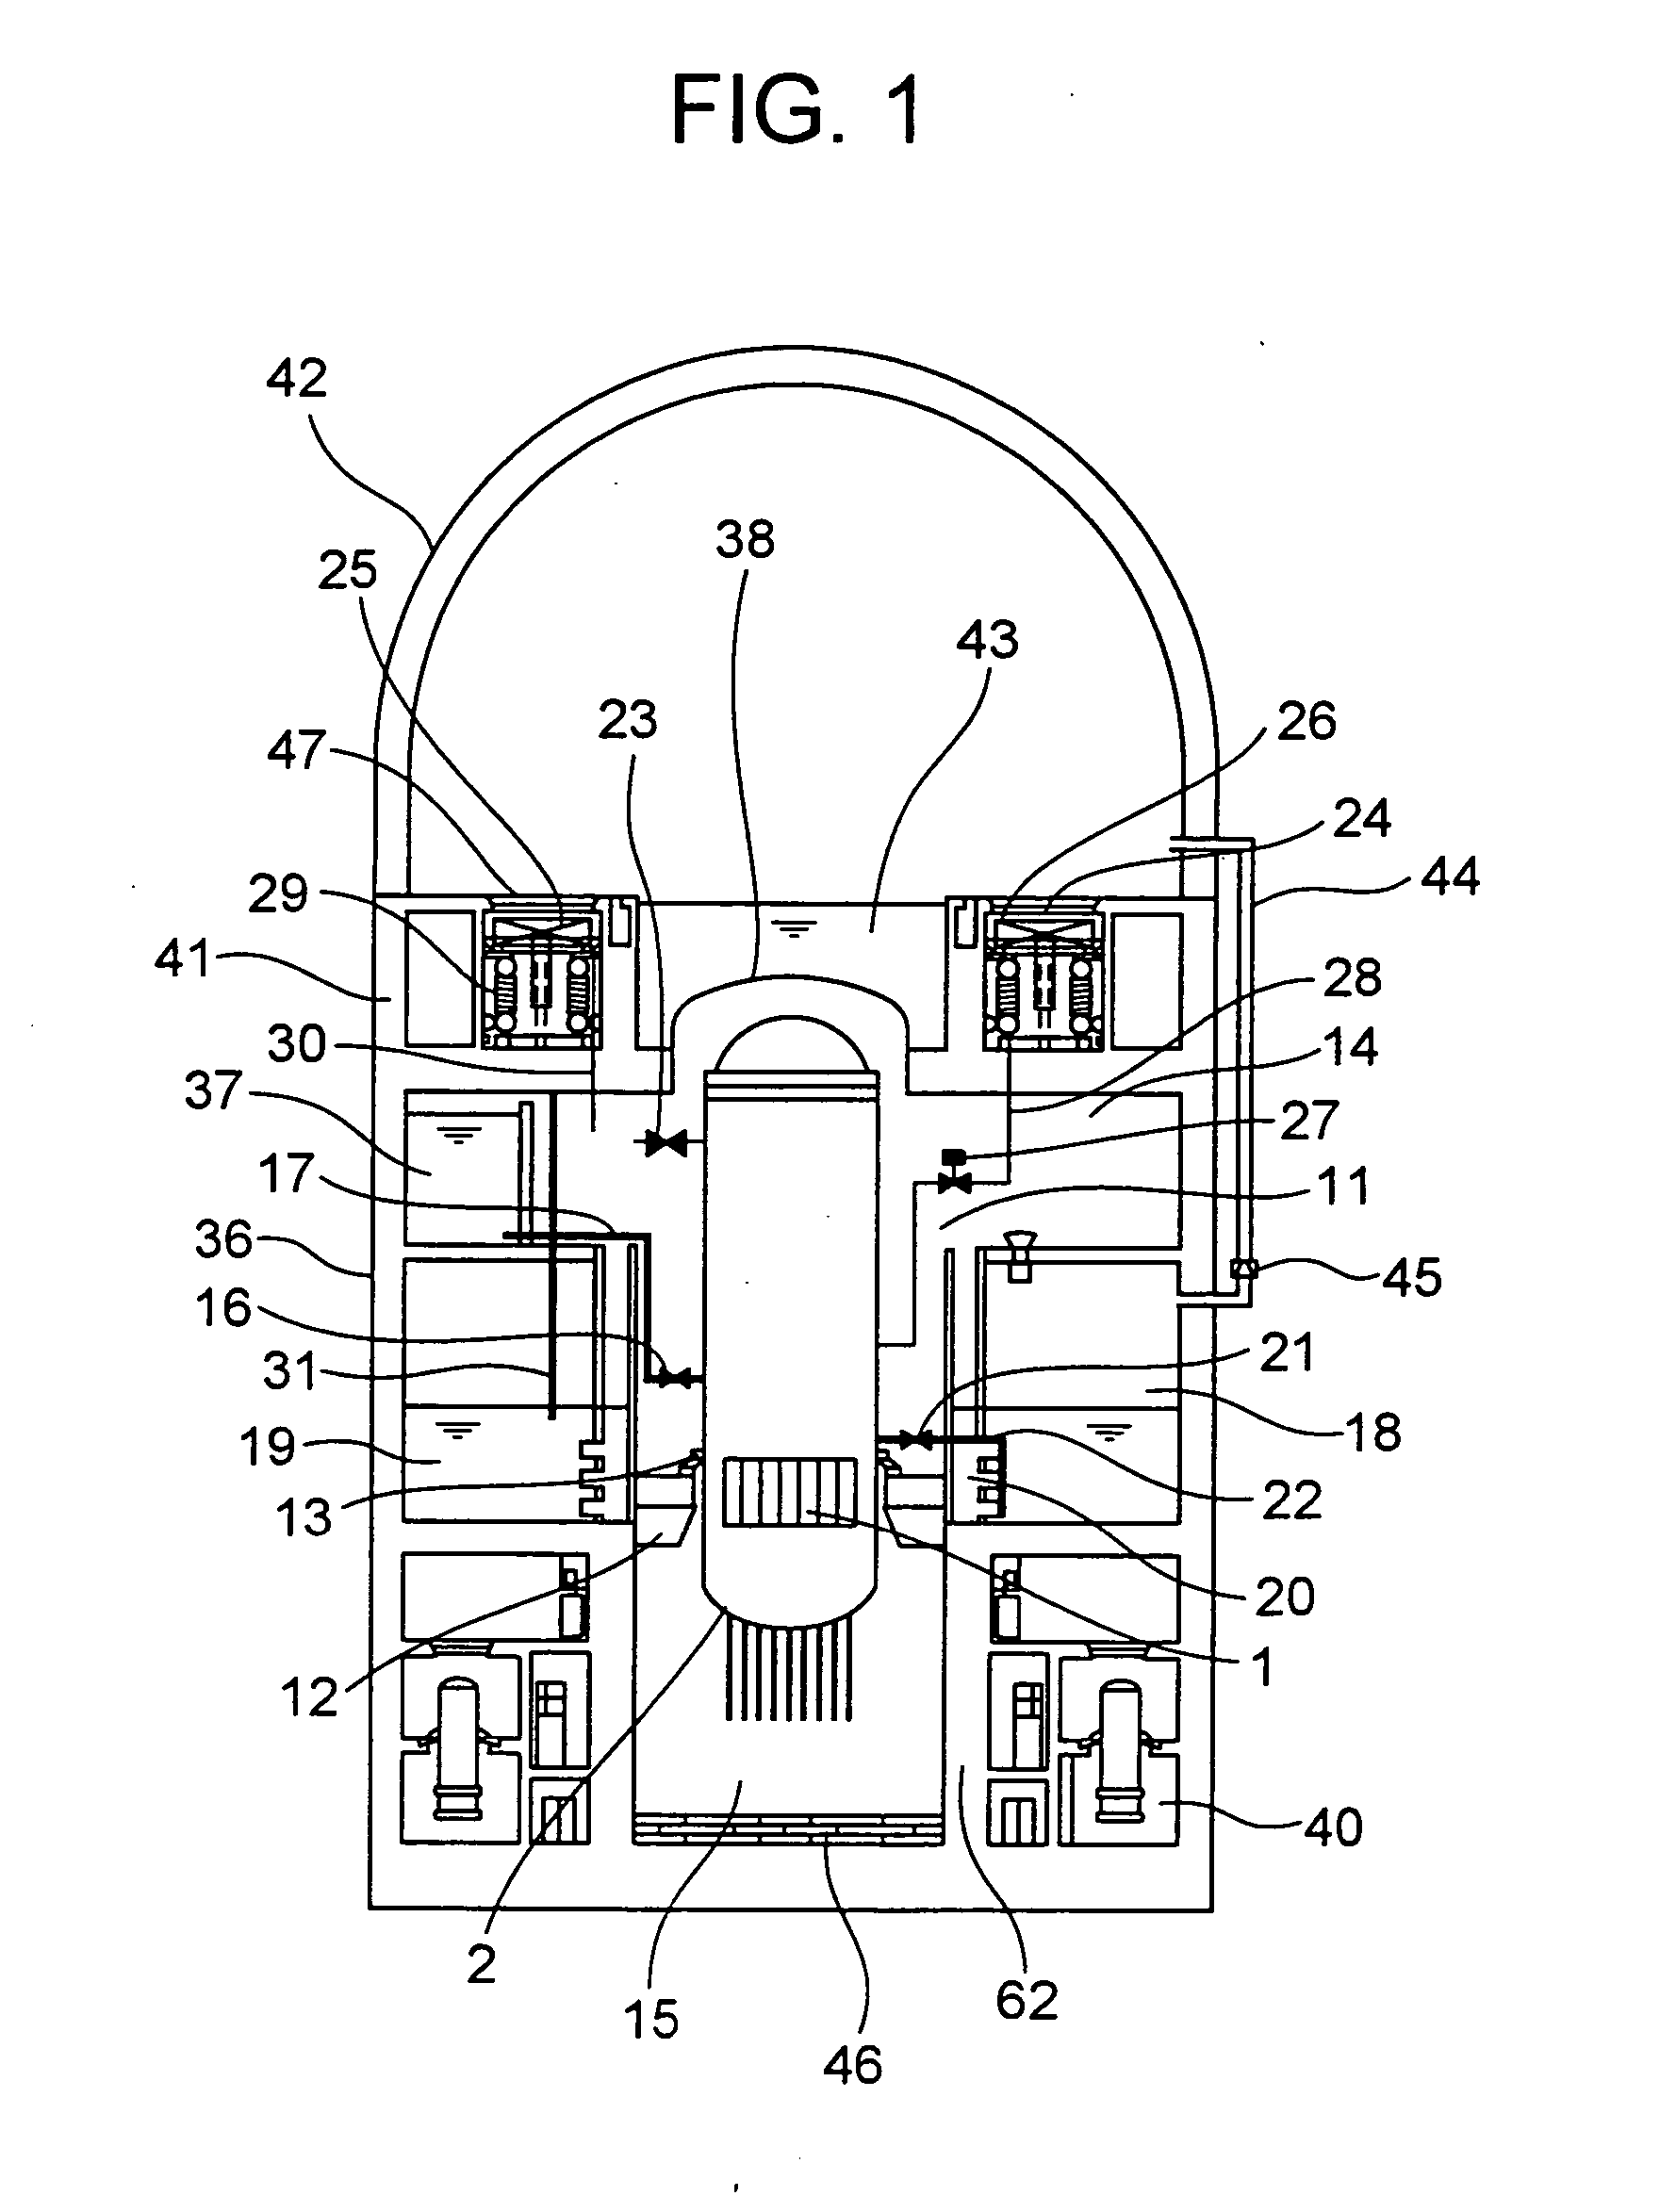 Reactor containment vessel and boiling water reactor power plant